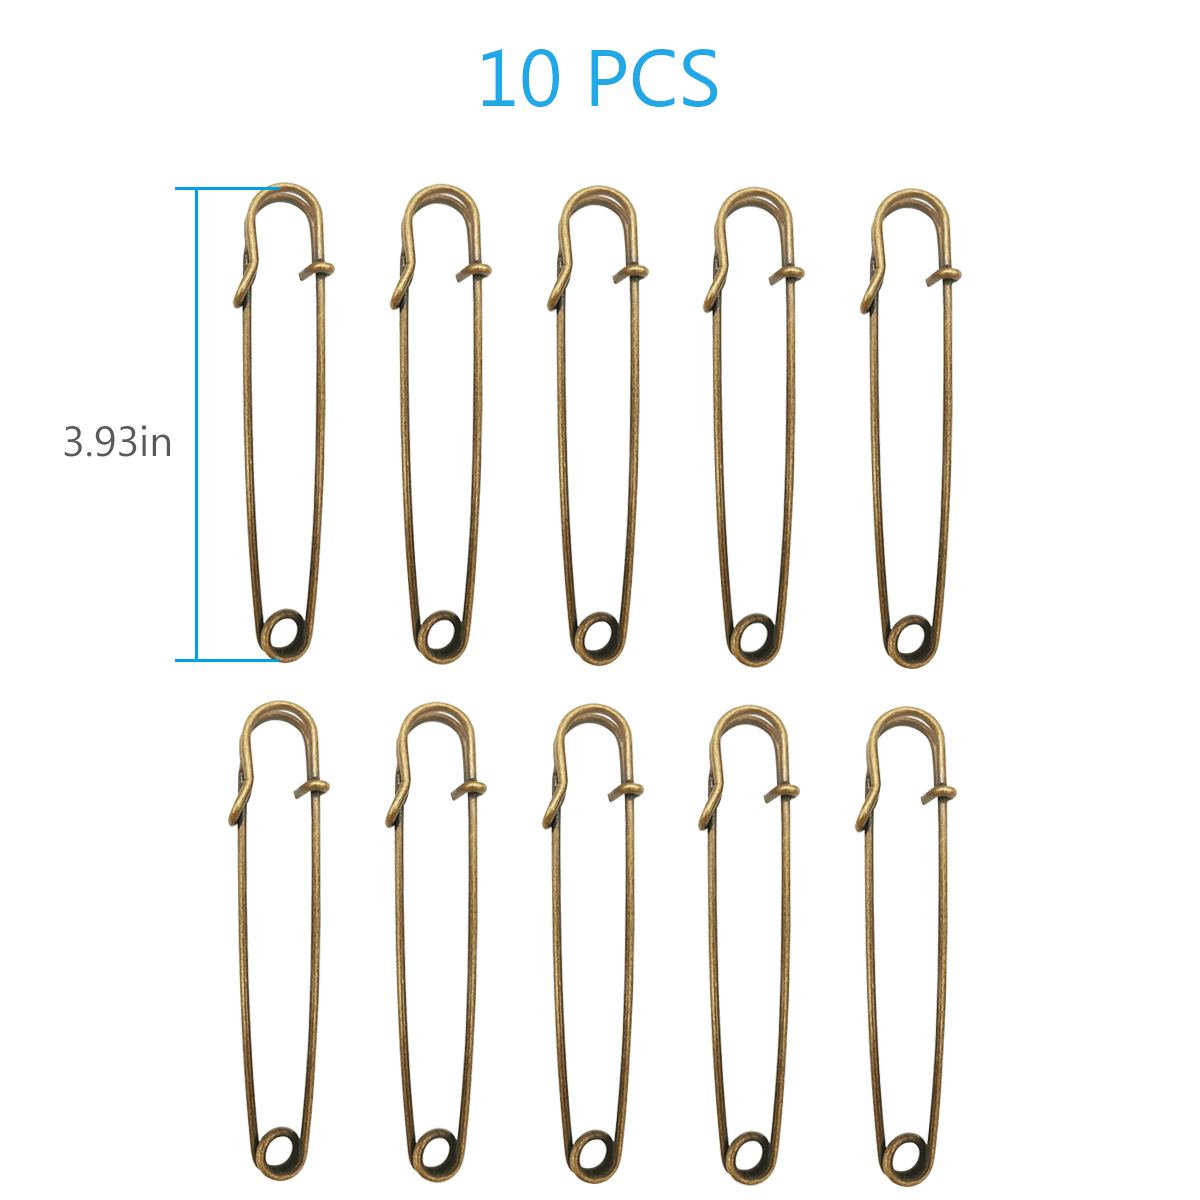 30PCS Safety Pins 3 Large Safety Pins for Clothes Leather Canvas